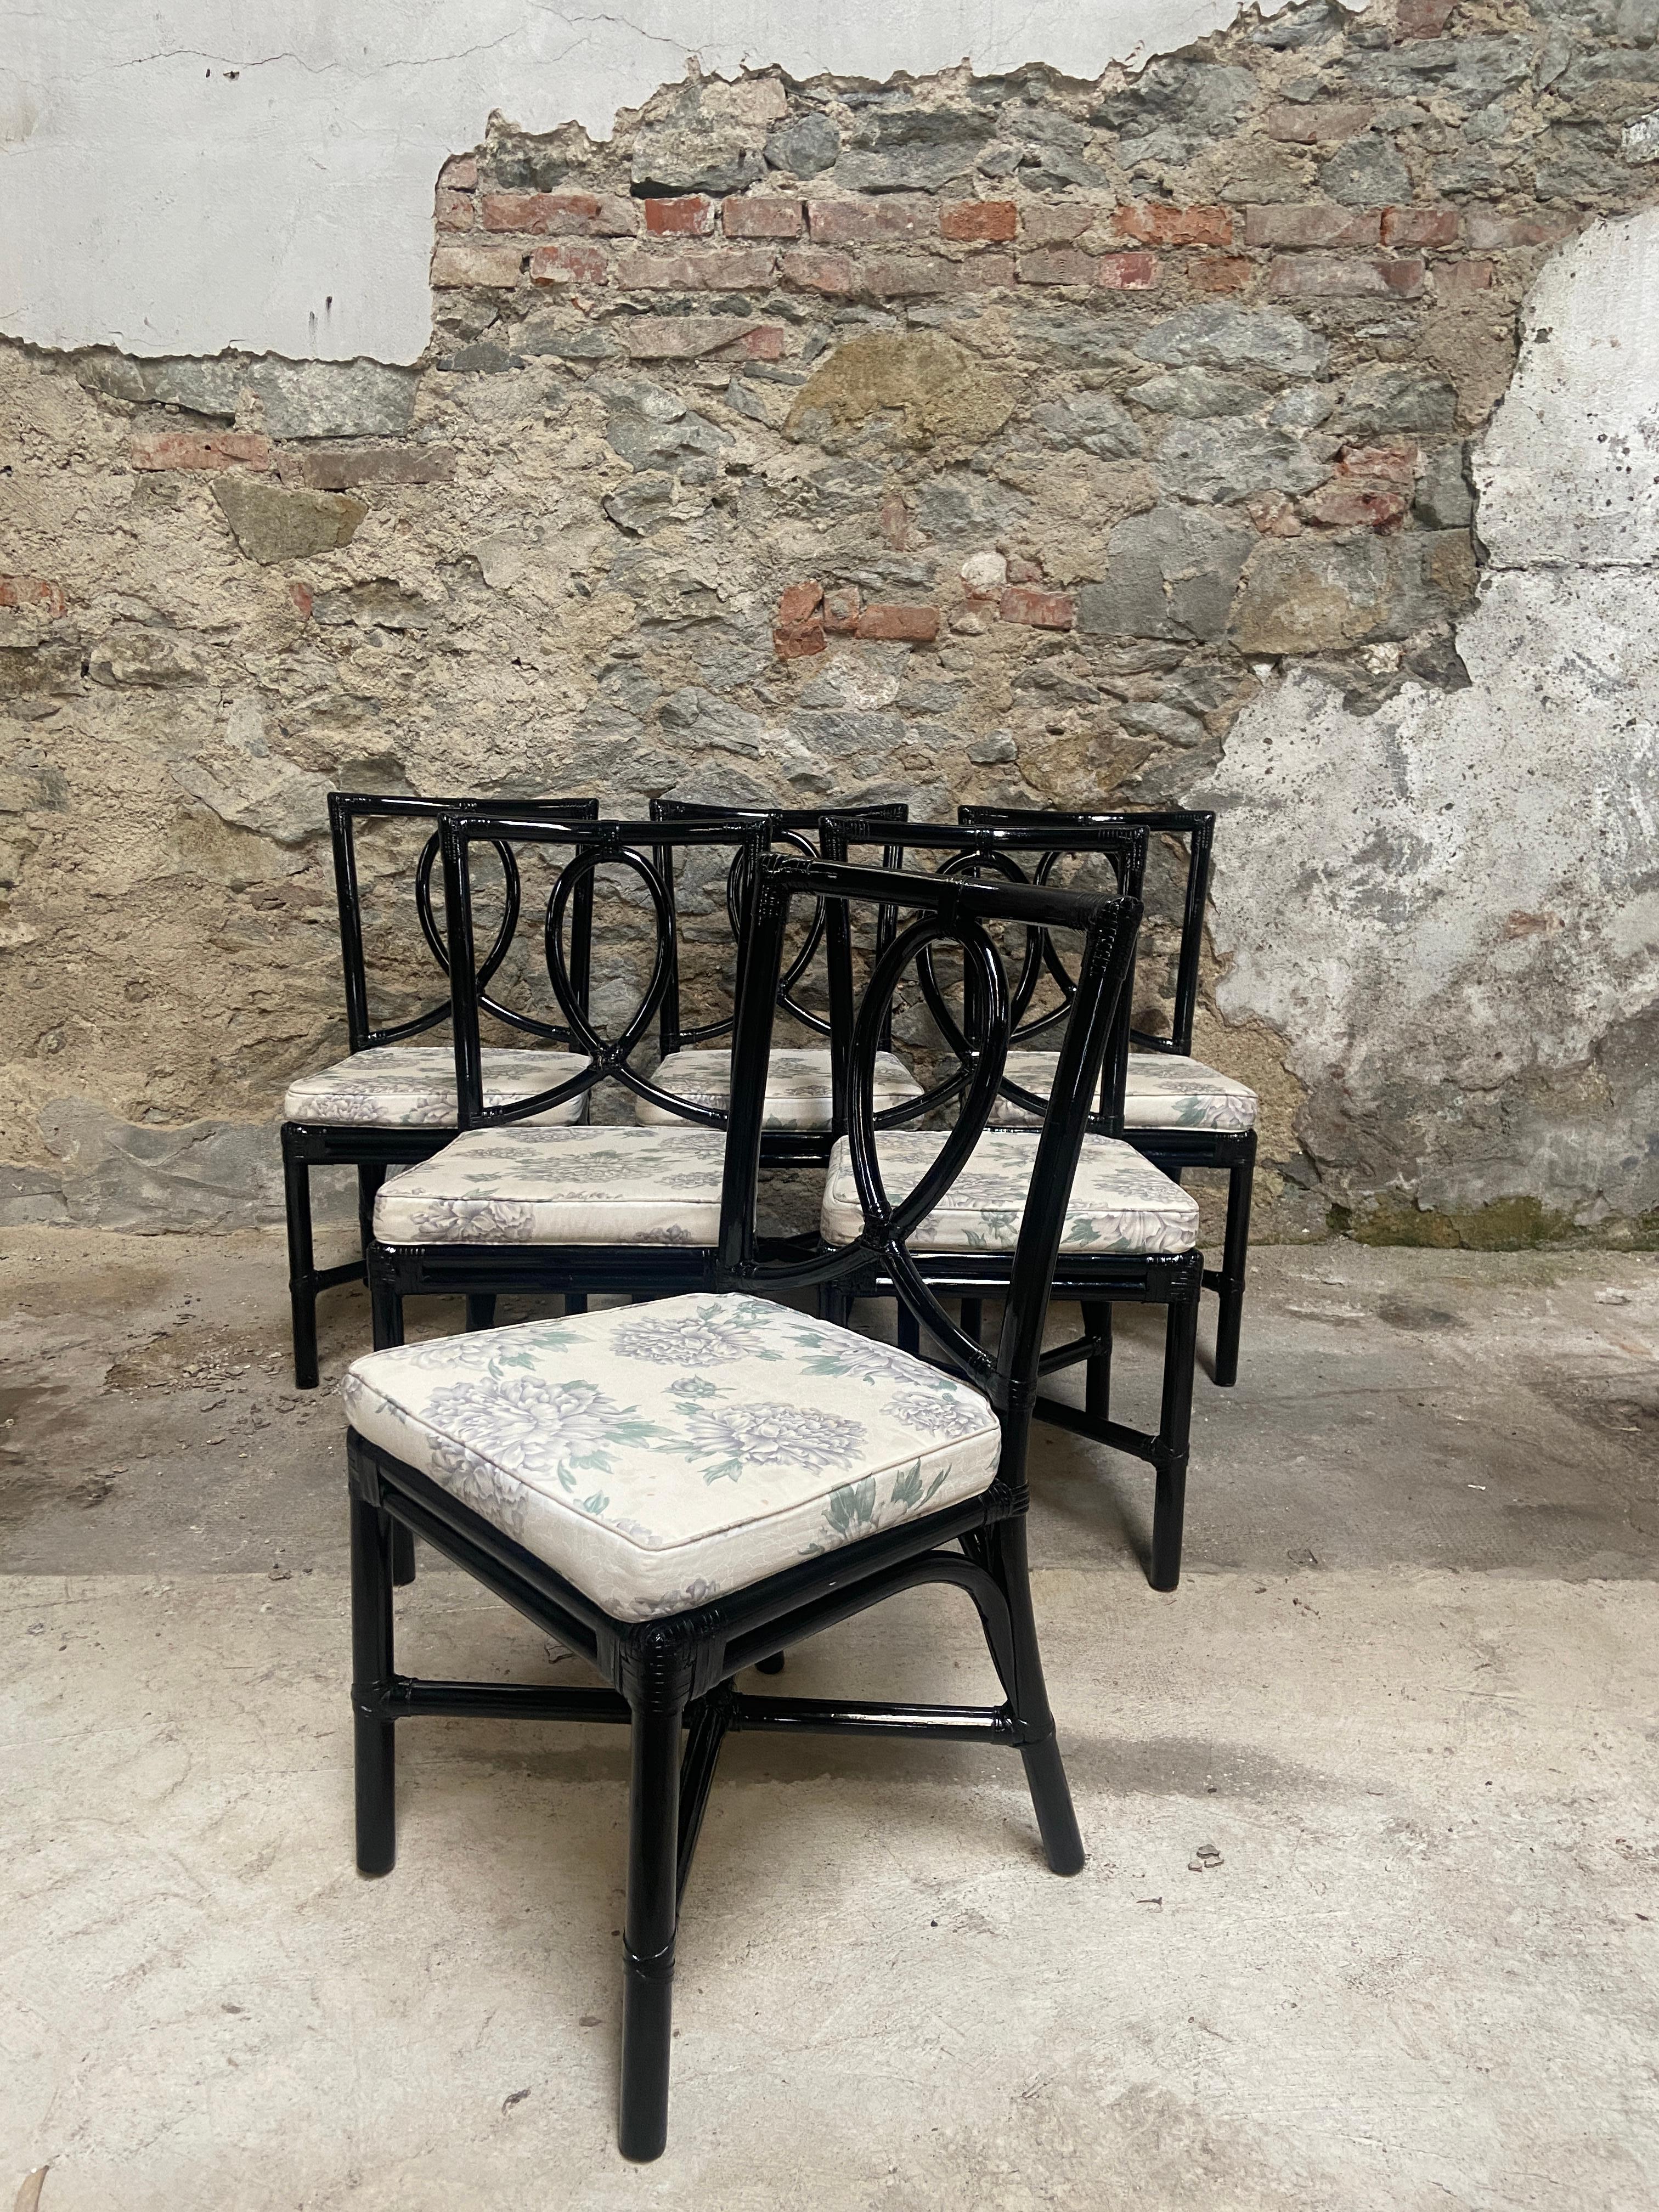 Late 20th Century Mid-Century Modern Italian Set of Black Painted Bamboo Chairs from Vivai del Sud For Sale